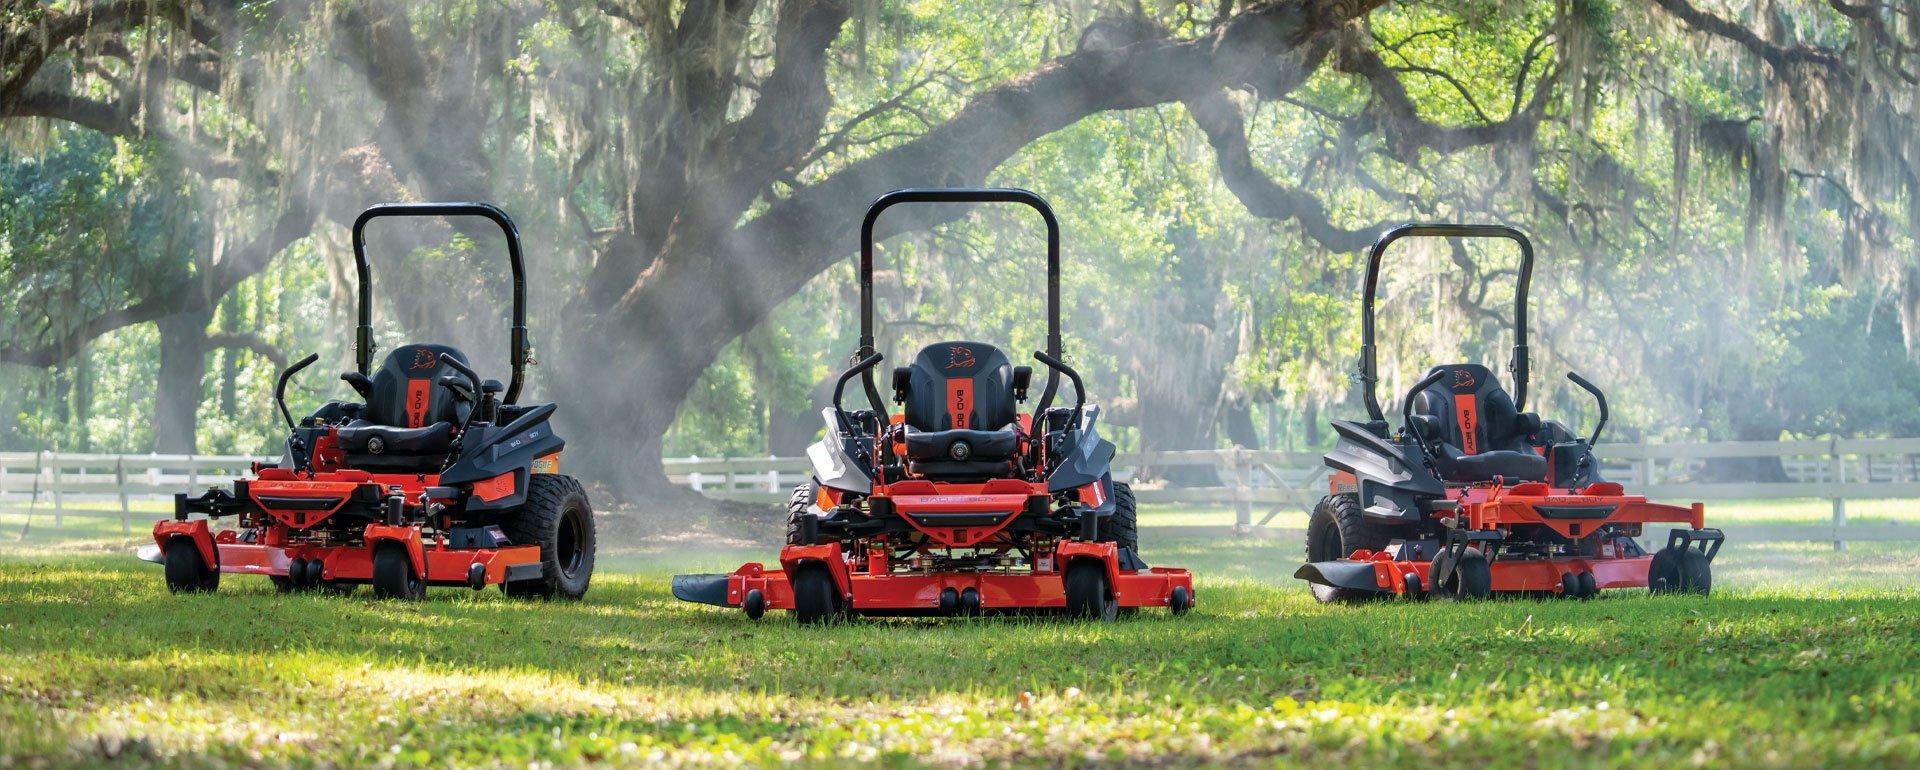 Bad Boy Mowers - Heavy-Duty Commercial and Residential Zero Turn Mowers Built To Last A Lifetime